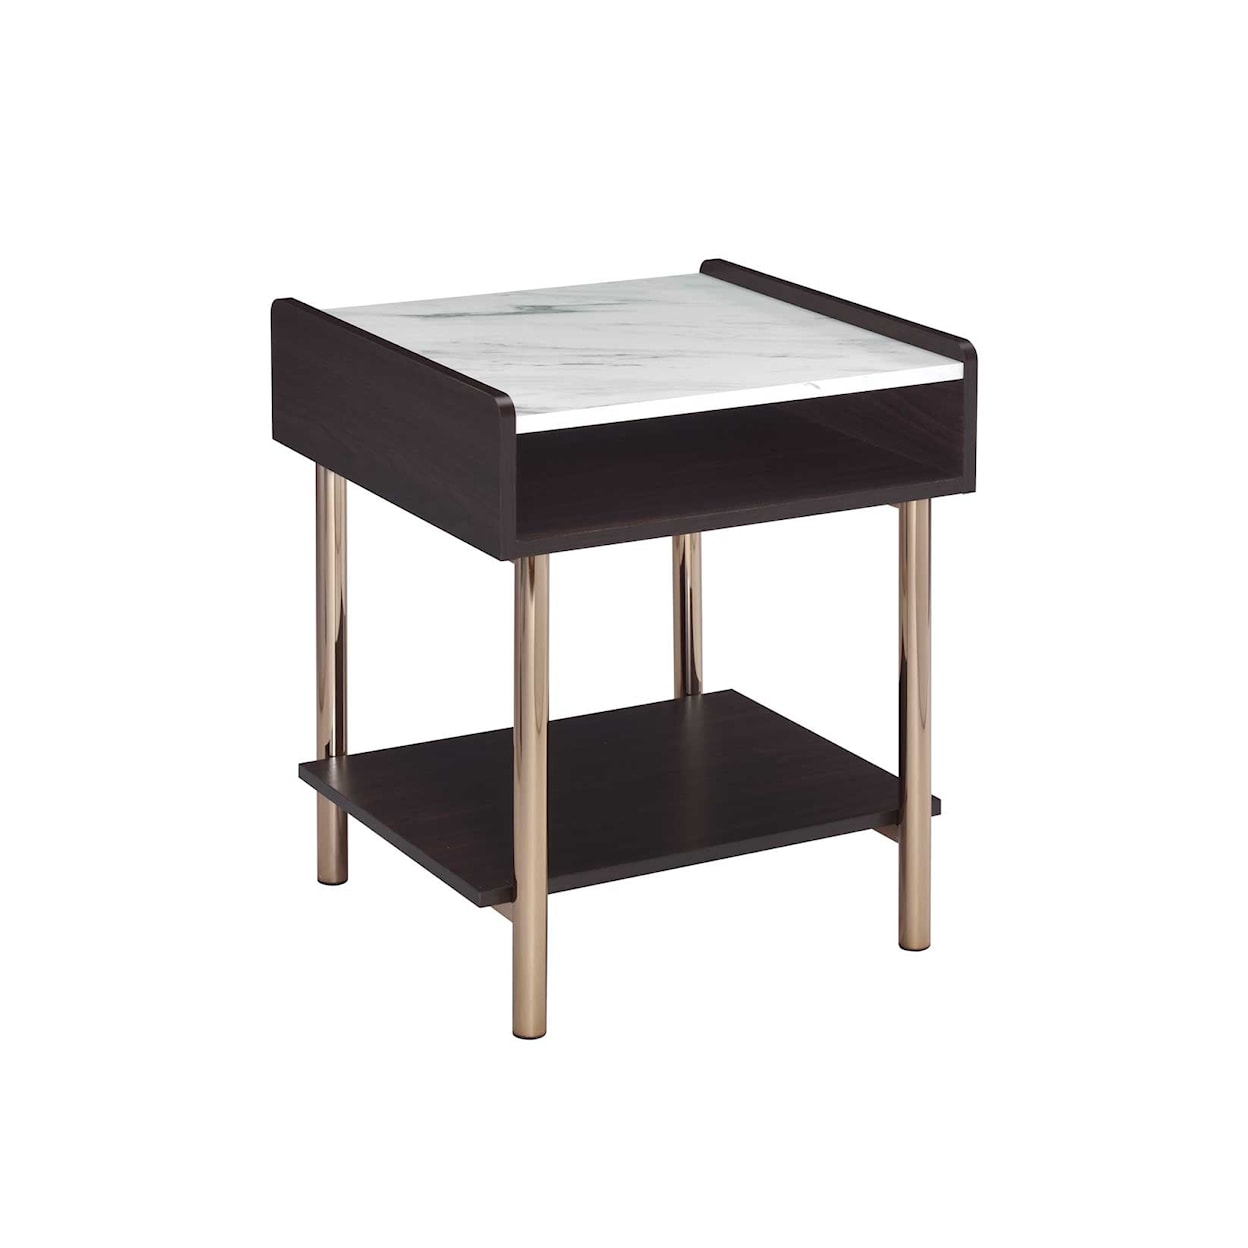 Steve Silver Carrie End Table with Storage